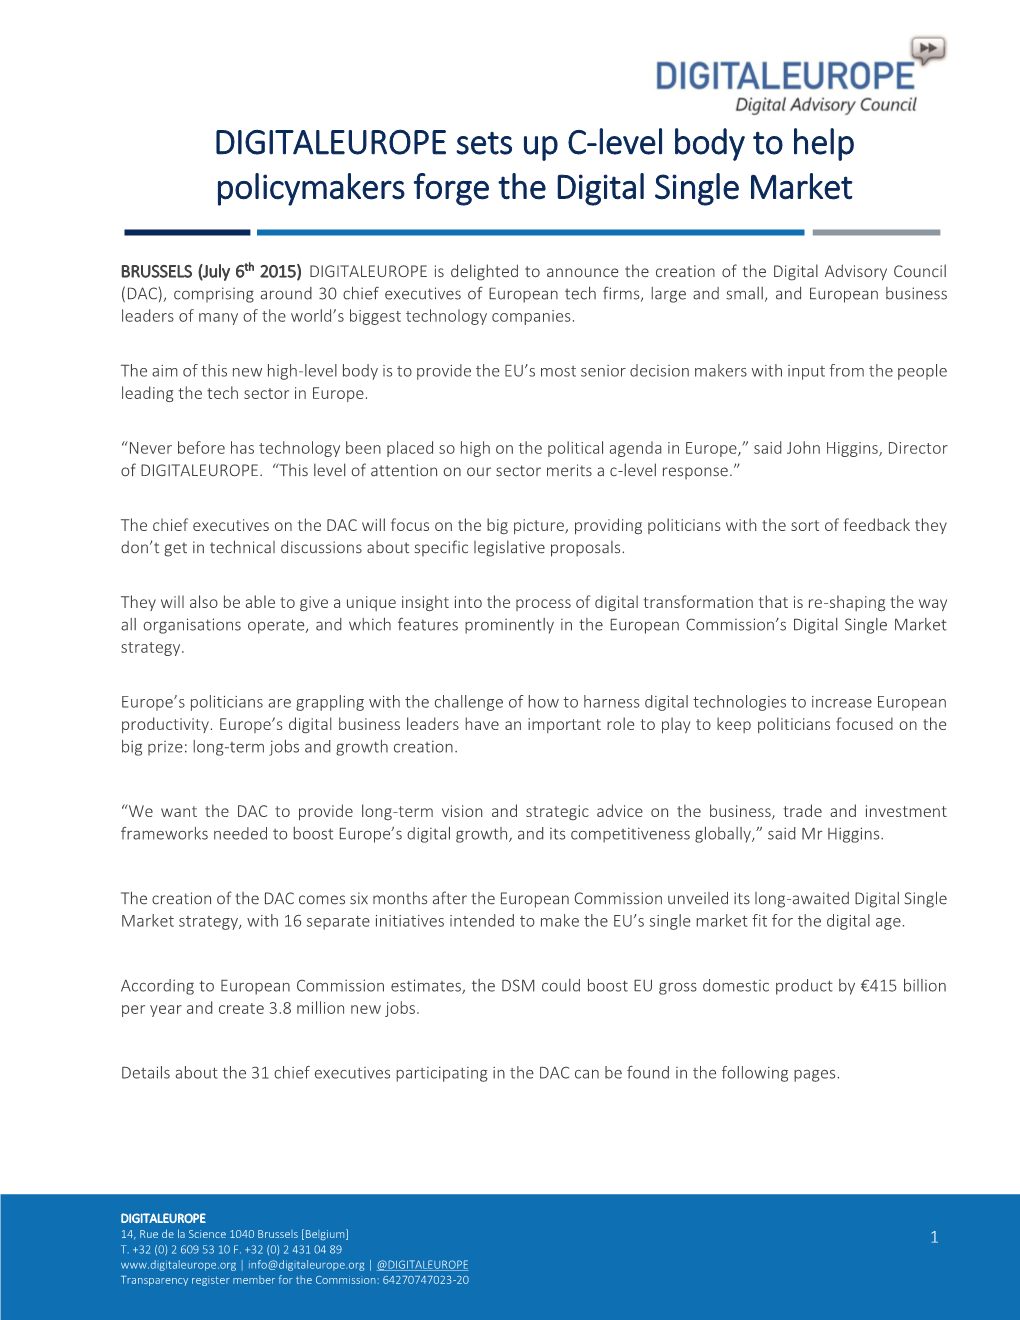 DIGITALEUROPE Sets up C-Level Body to Help Policymakers Forge the Digital Single Market